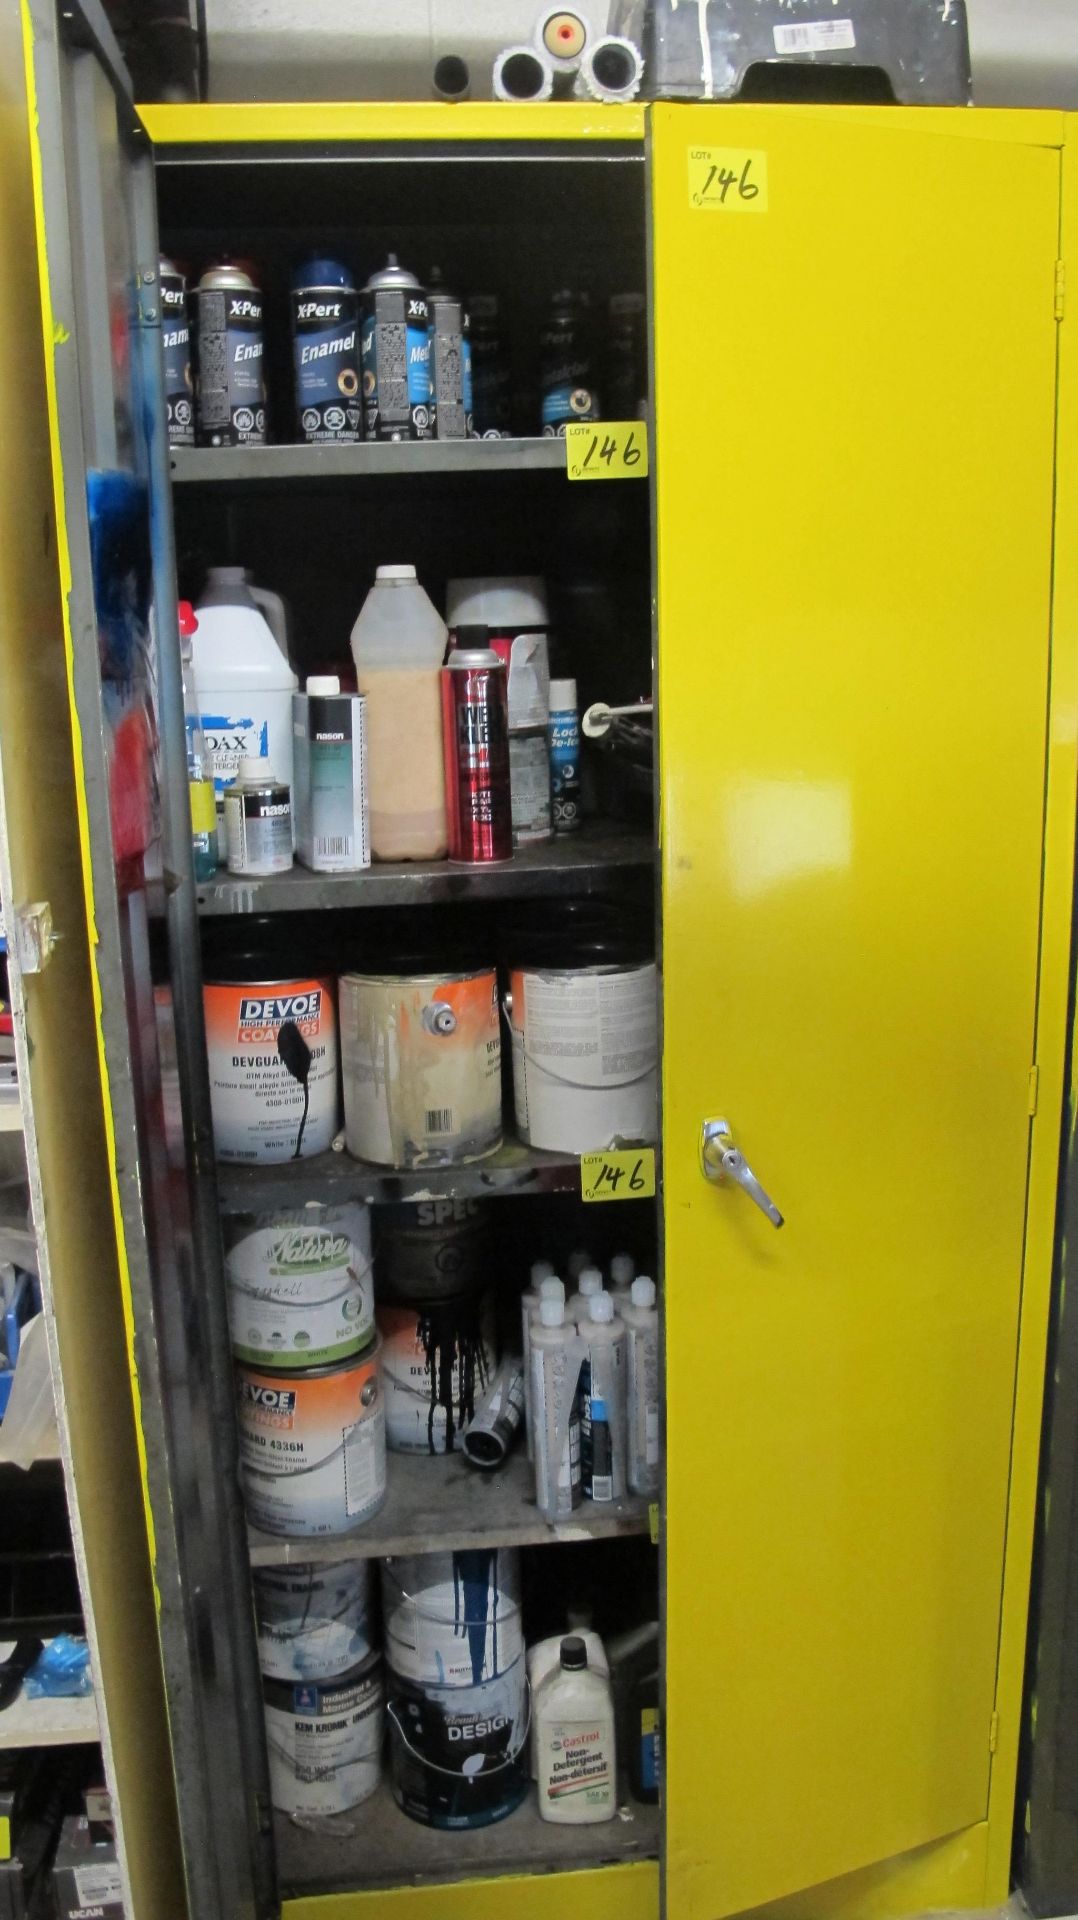 FIREPROOF CABINET W/ CONTENTS INCLUDING PAIN, LUBRICANTS, OILS, ETC. AND YELLOW CABINET MOUNTED ON